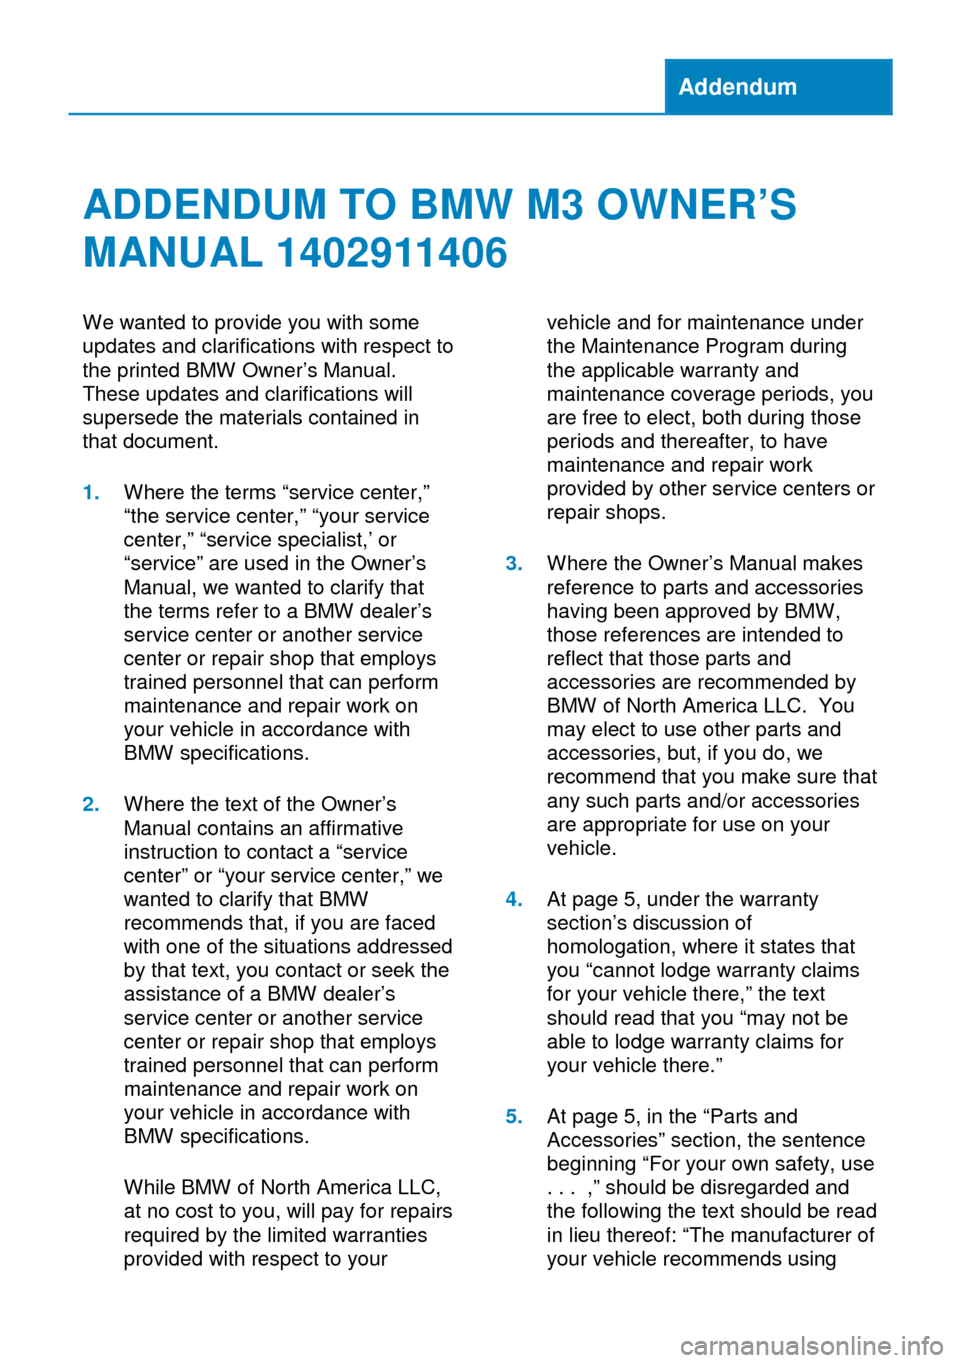 BMW M3 COUPE 2013 E92 Owners Manual Addendum
ADDENDUM TO BMW M3 OWNER’S
MANUAL 1402911406
We wanted to provide you with some
updates and clarifications with respect to
the printed BMW Owner’s Manual.
These updates and clarifications